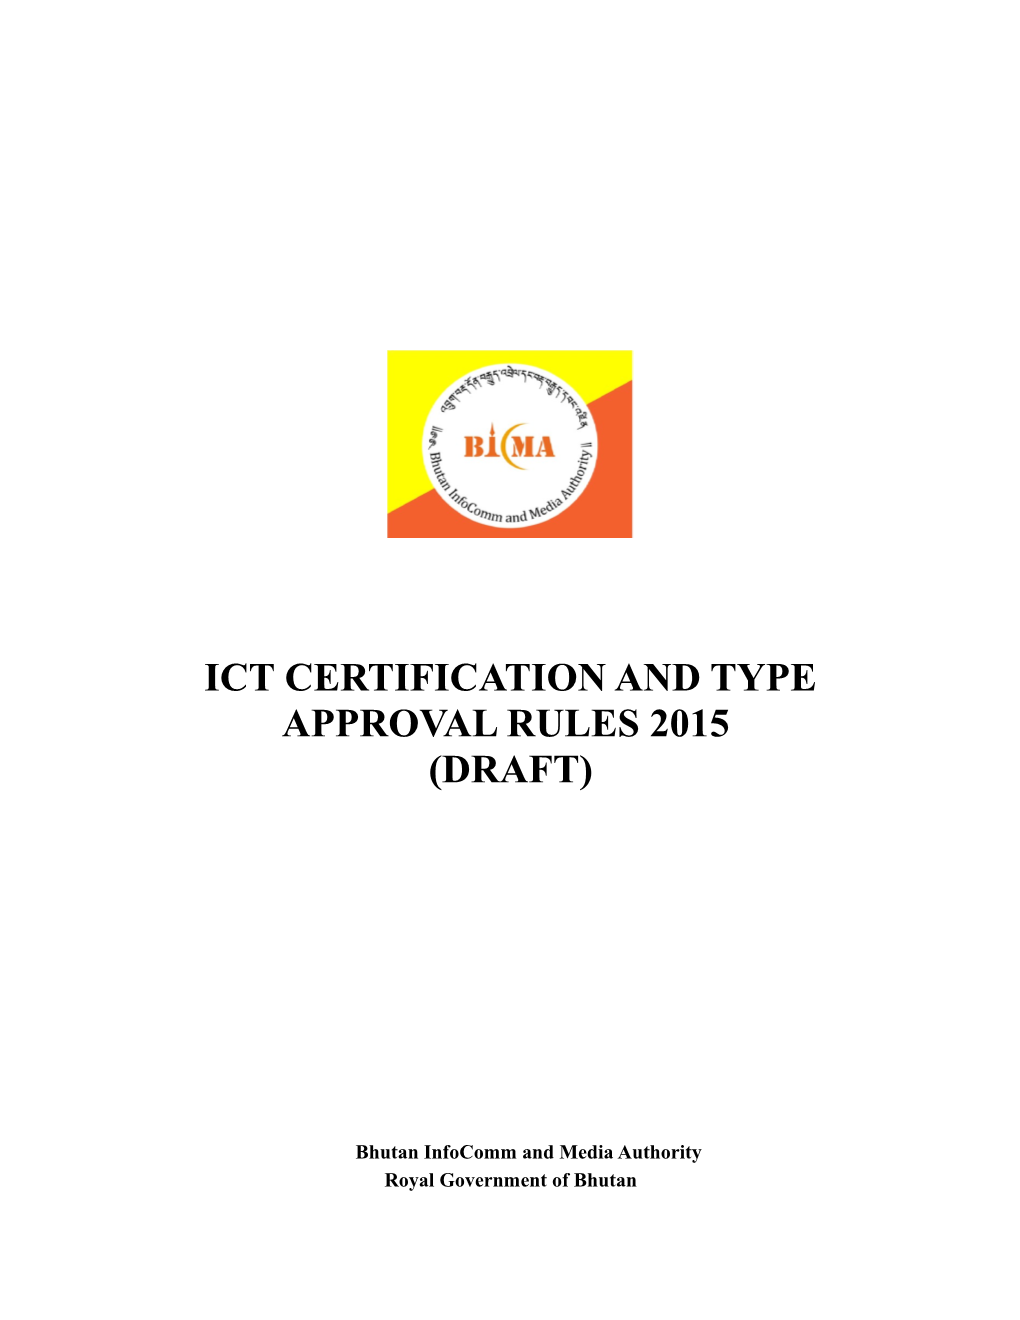 Ict Certification and Type Approval Rules 2015